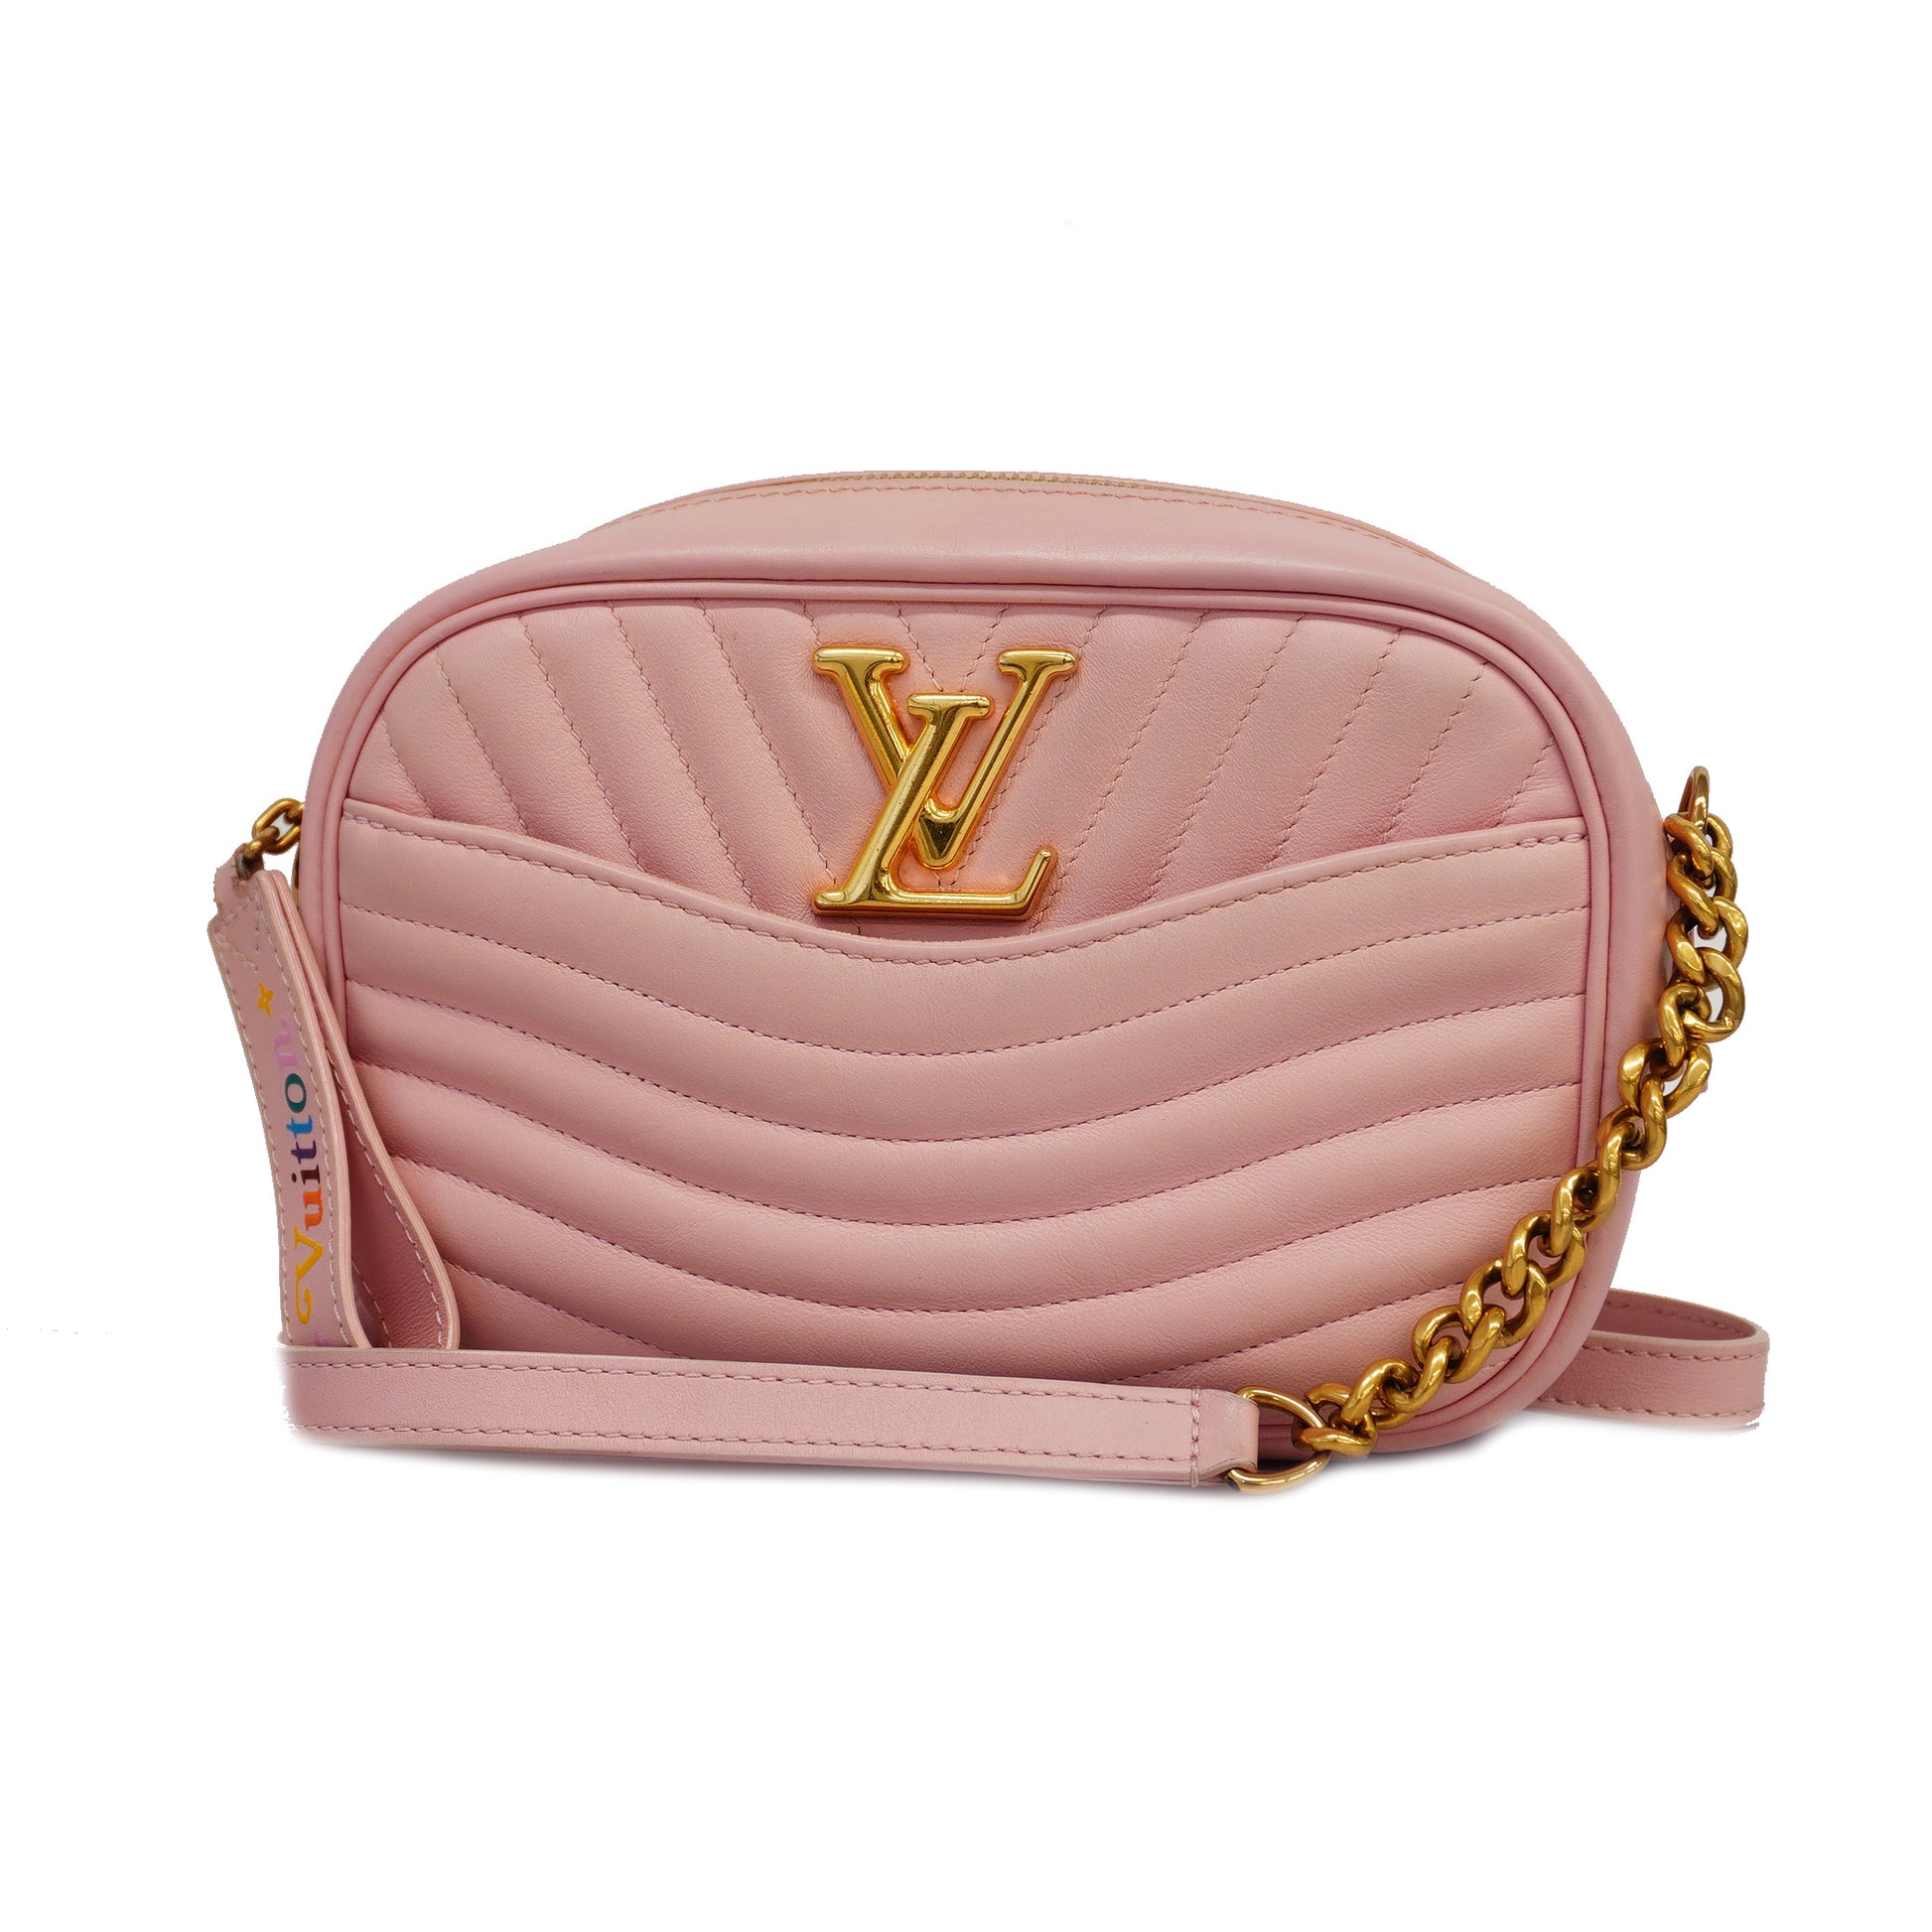 Products by Louis Vuitton: Louis Vuitton New Wave Camera Bag